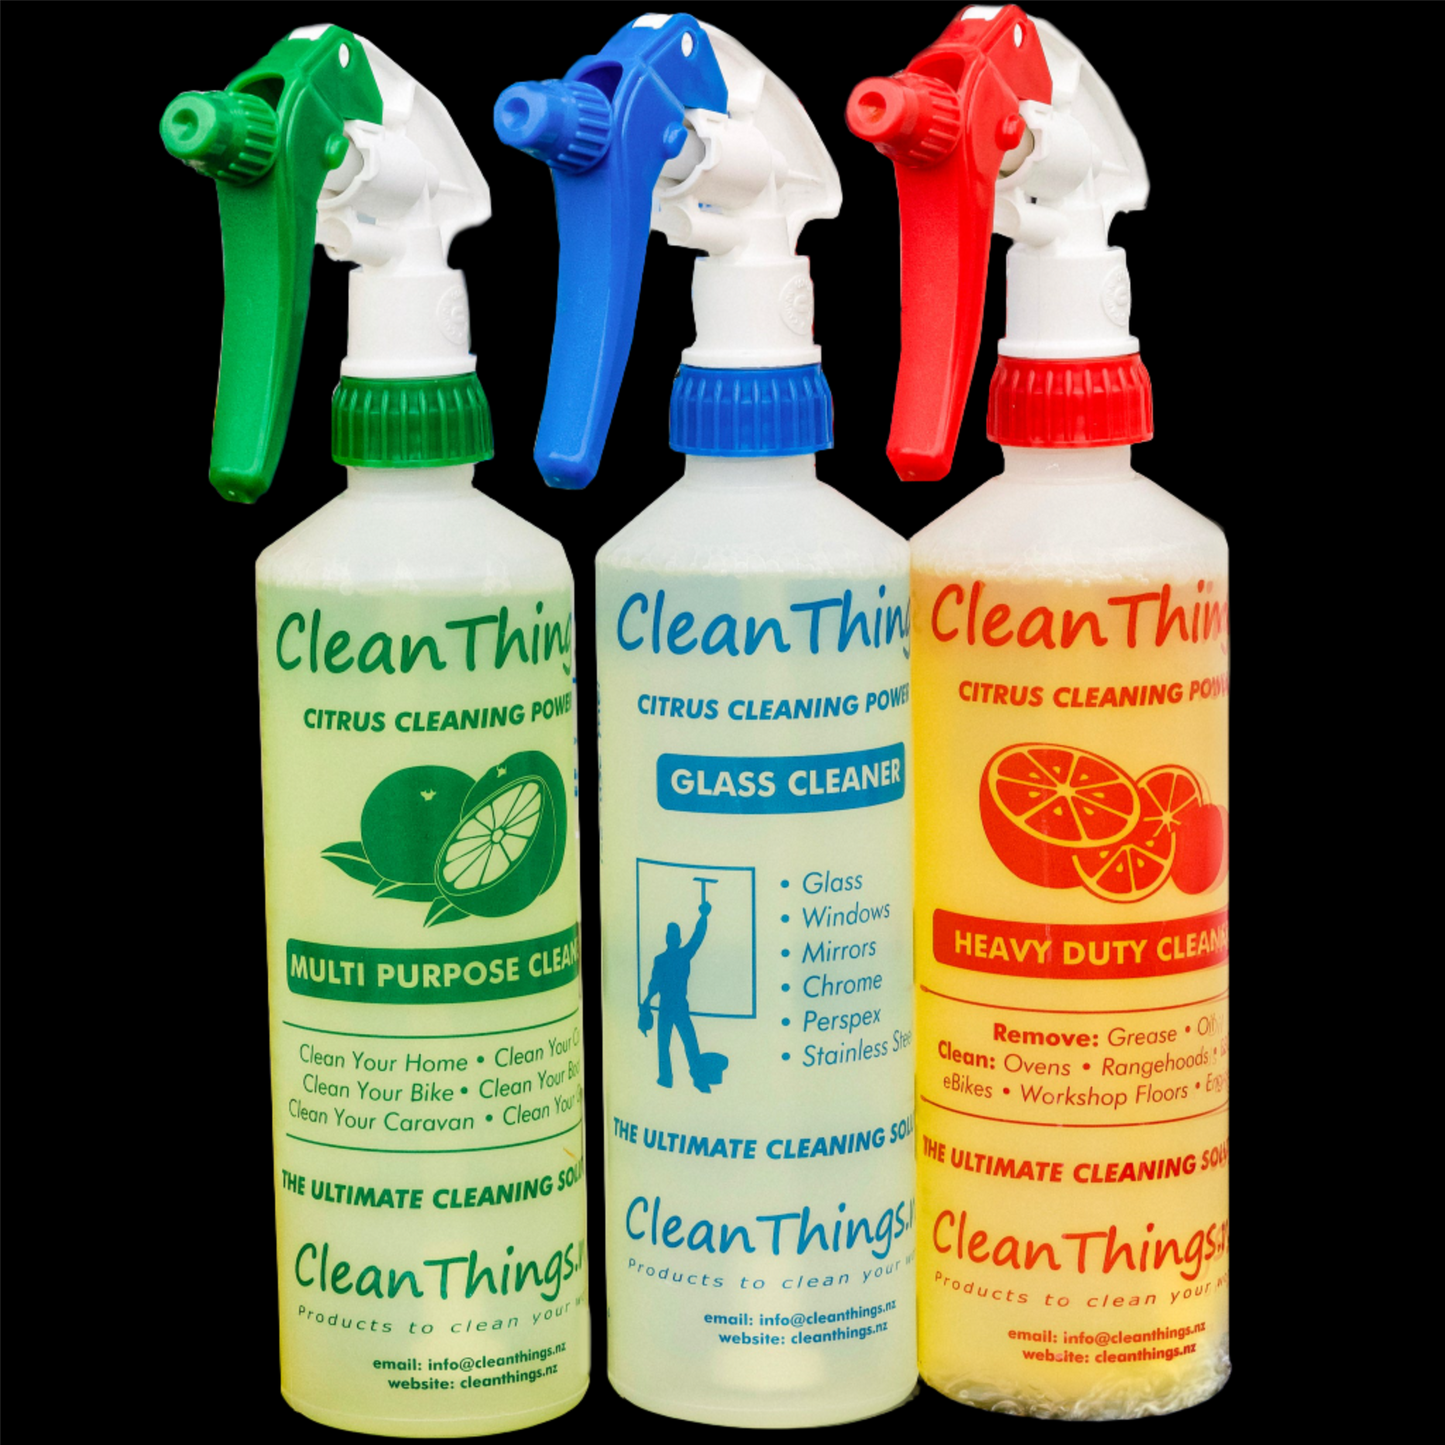 3 Citrus Cleaner Spray Bottles 500mls ready to use: Green Multi Purpose Cleaner & Blue Glass Cleaner & Red Heavy Duty Cleaner